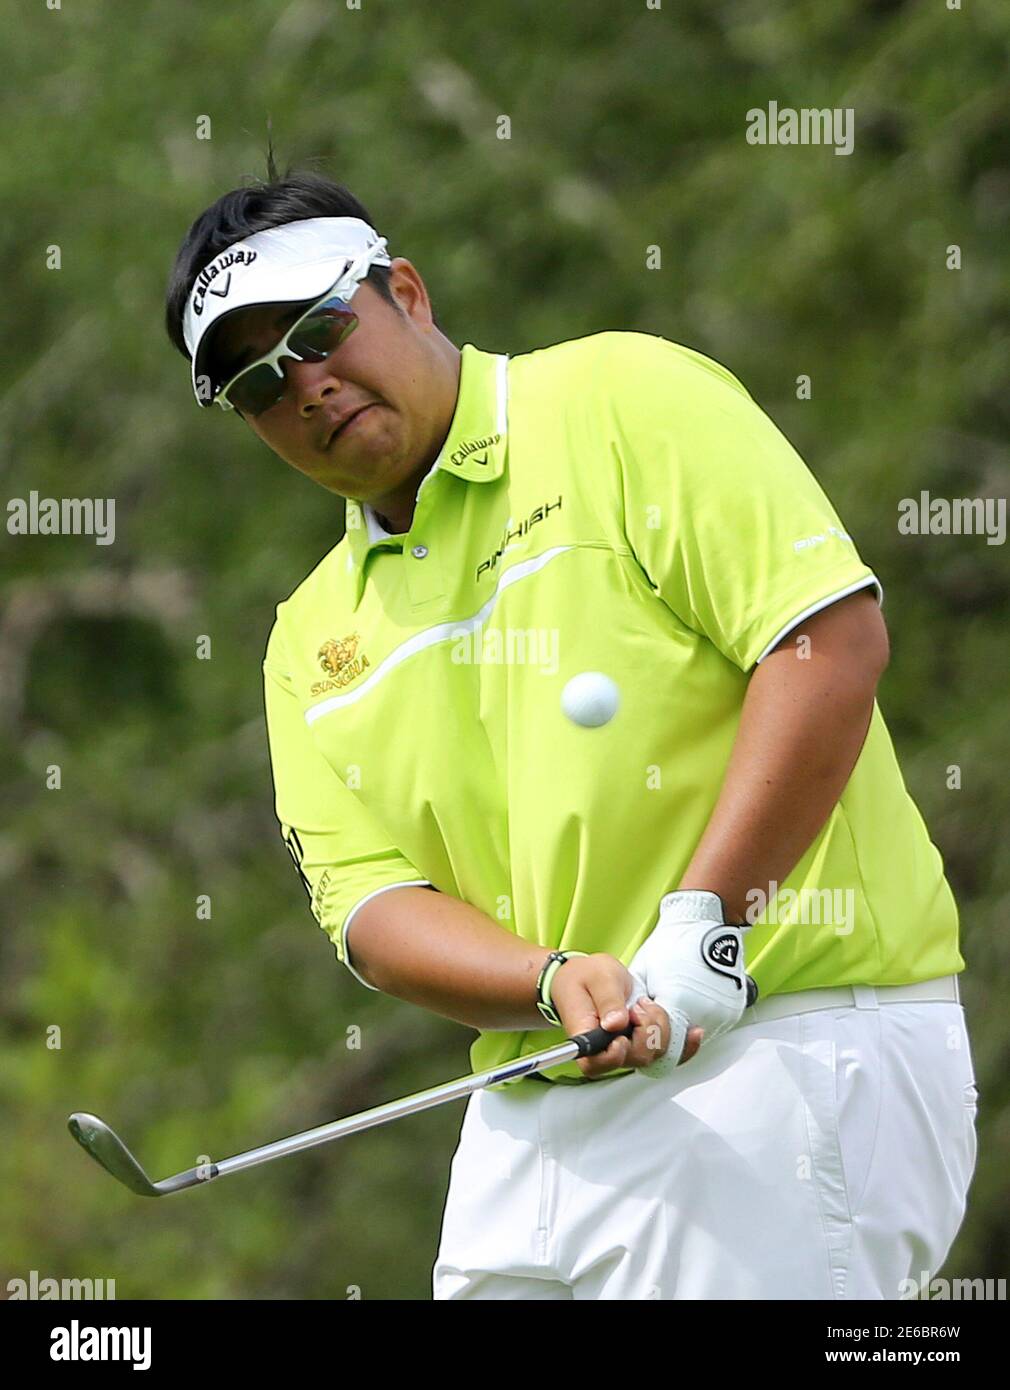 Kiradech Aphibarnrat of Thailand plays a shot on the 13th hole during the  Nedbank Challenge at Sun City December 7, 2014. Briton Danny Willett landed  six birdies and the biggest win of